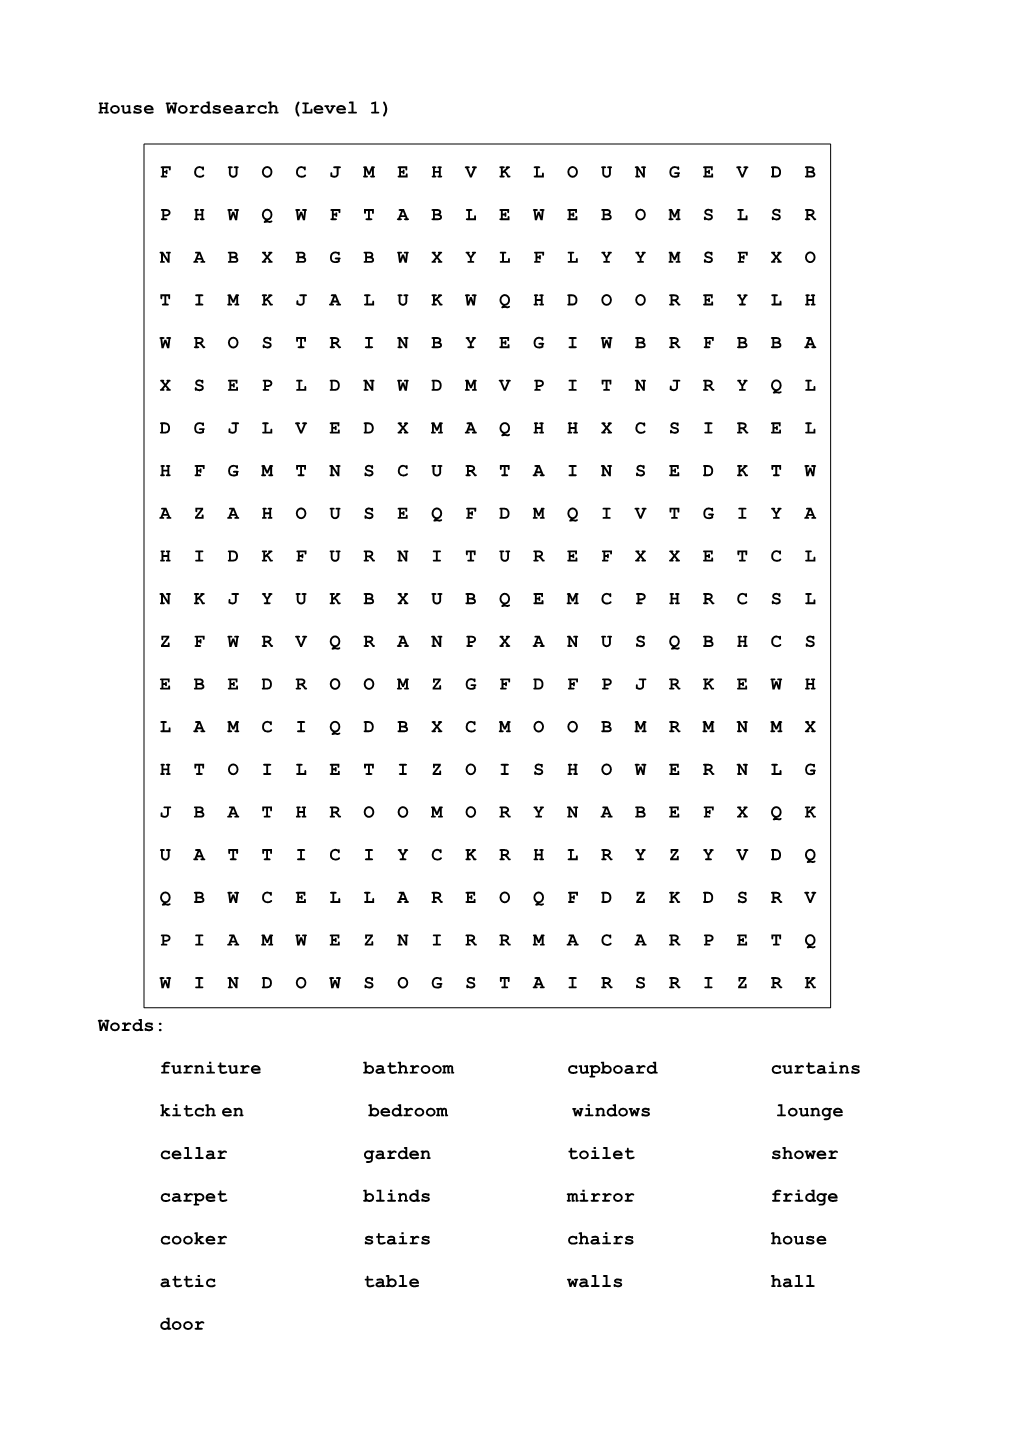 House Wordsearch (Level 1)